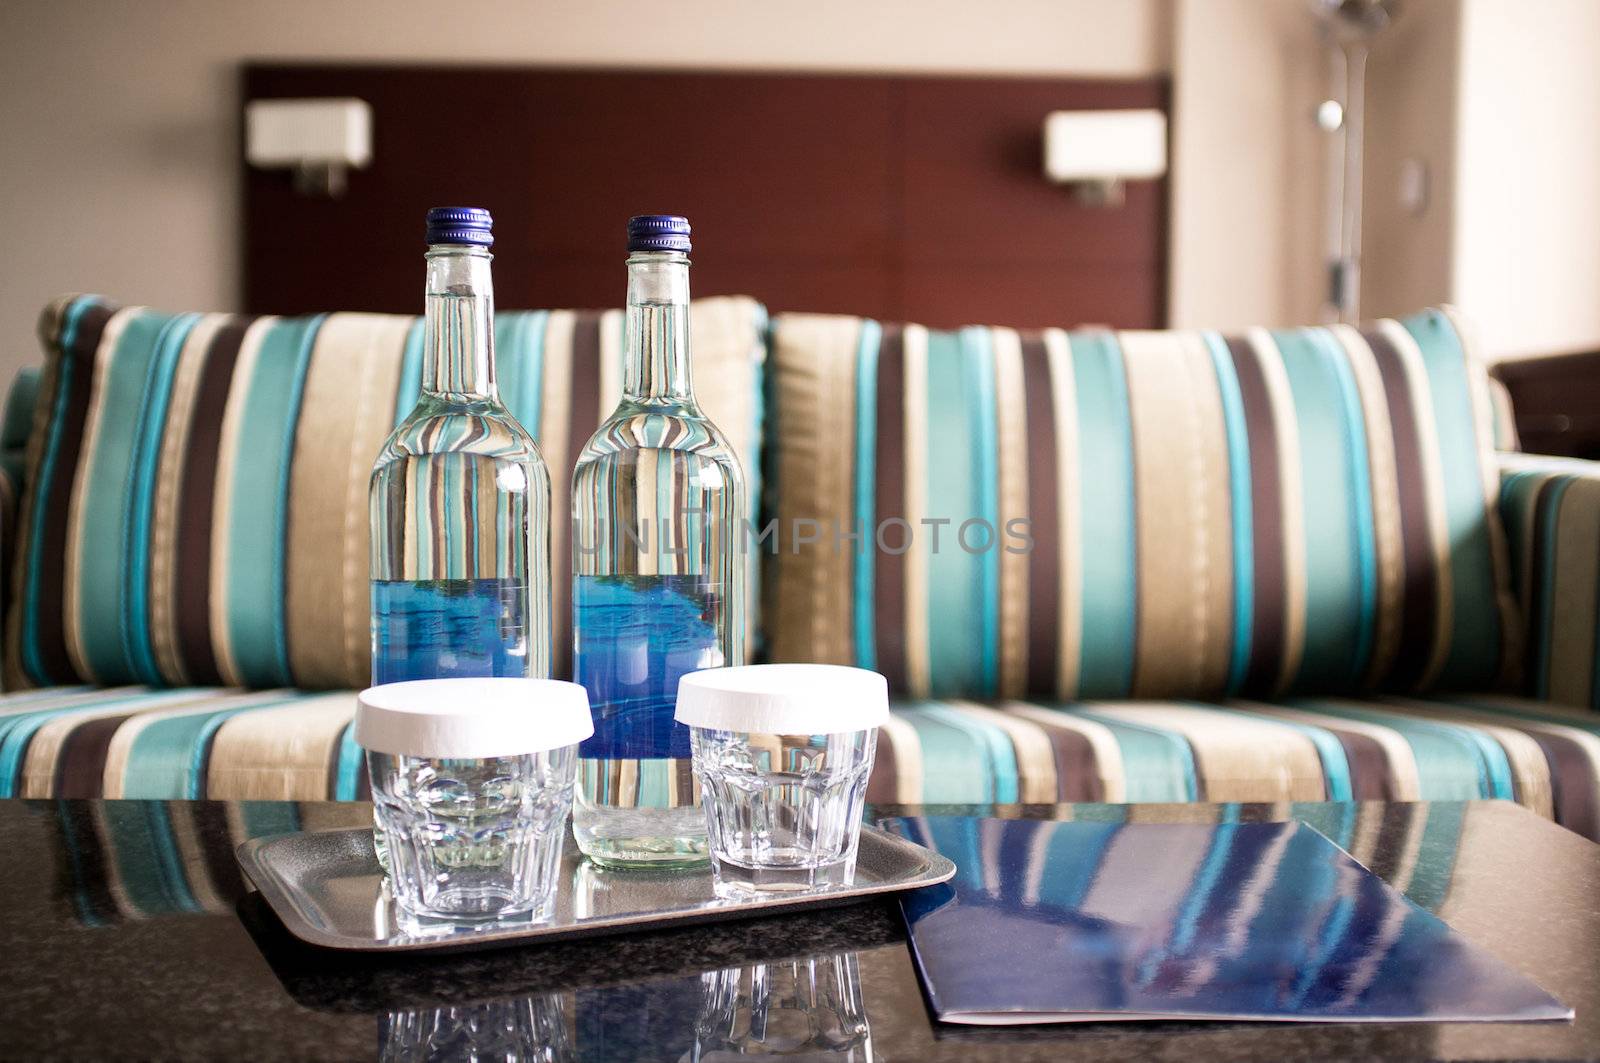 Hotel room shot. Beverage bottles in focus by stockyimages